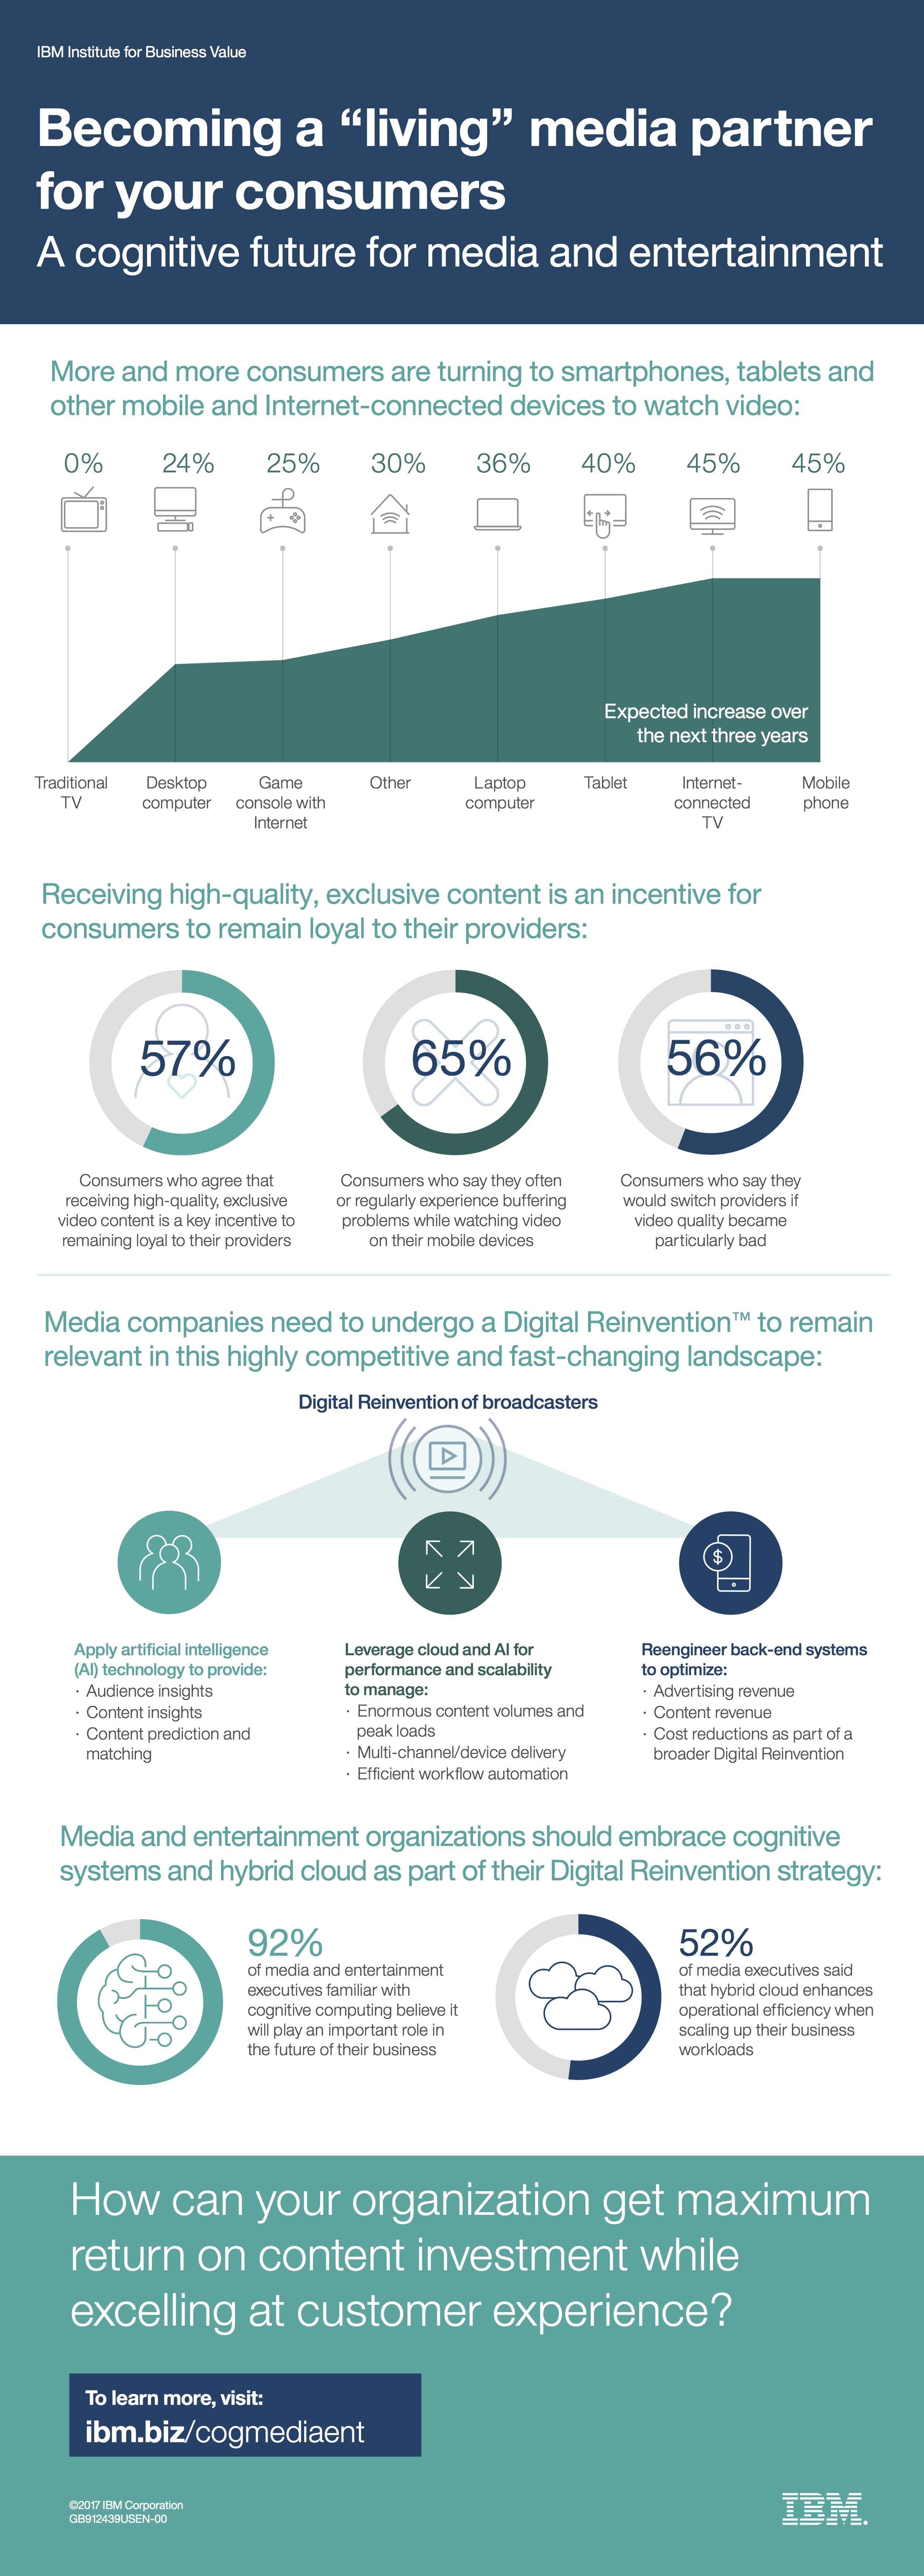 Mobile video viewers demand better content experiences